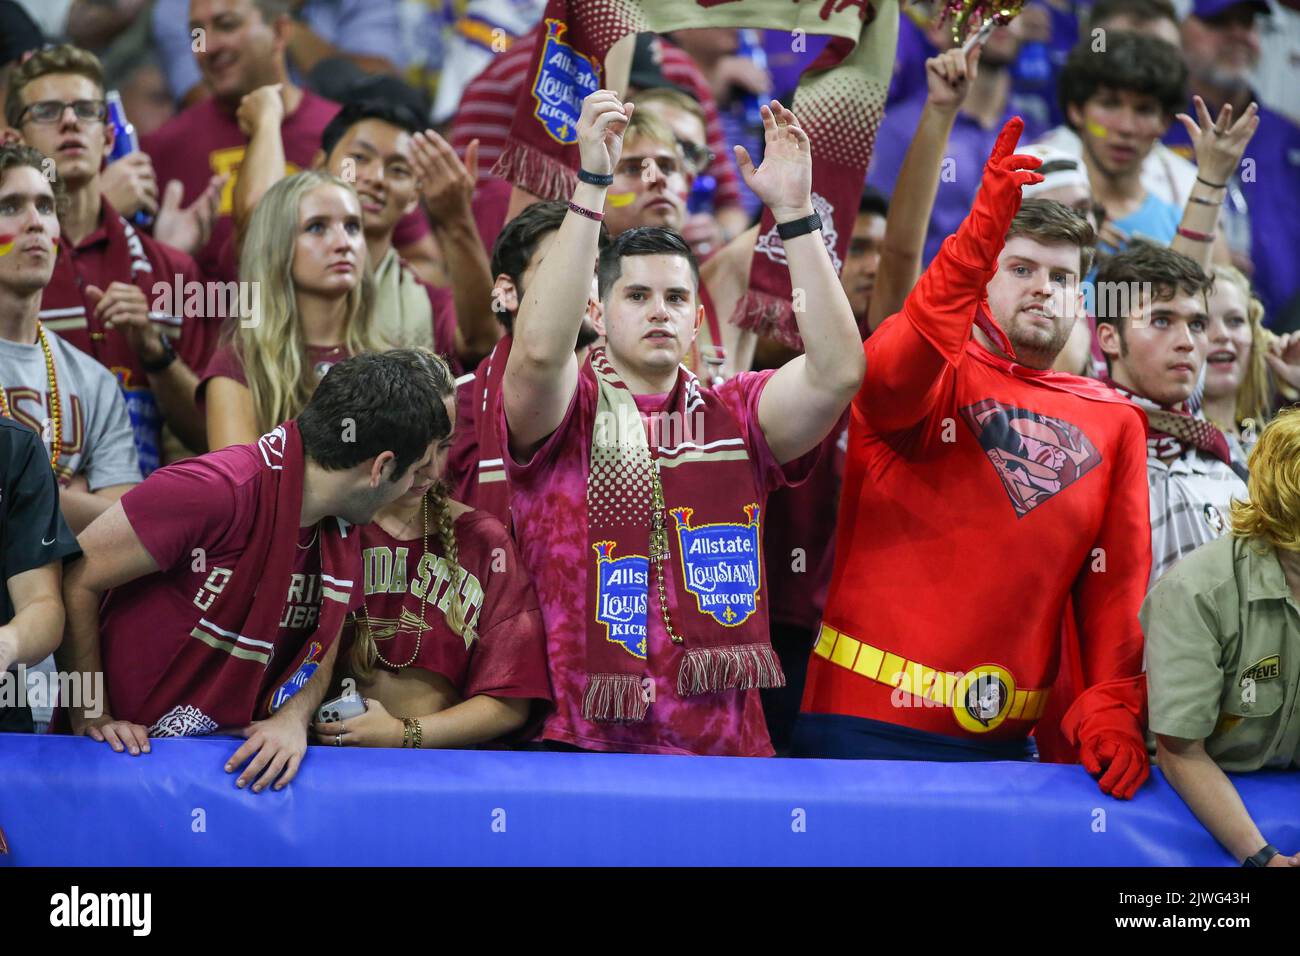 September 4, 2022: Florida St. fan's cheer on their team during the Allstate Louisiana Kickoff Game between the Florida St. Seminoles and the LSU Tigers at the Caesars Superdome in New Orleans, LA. Jonathan Mailhes/CSM Stock Photo